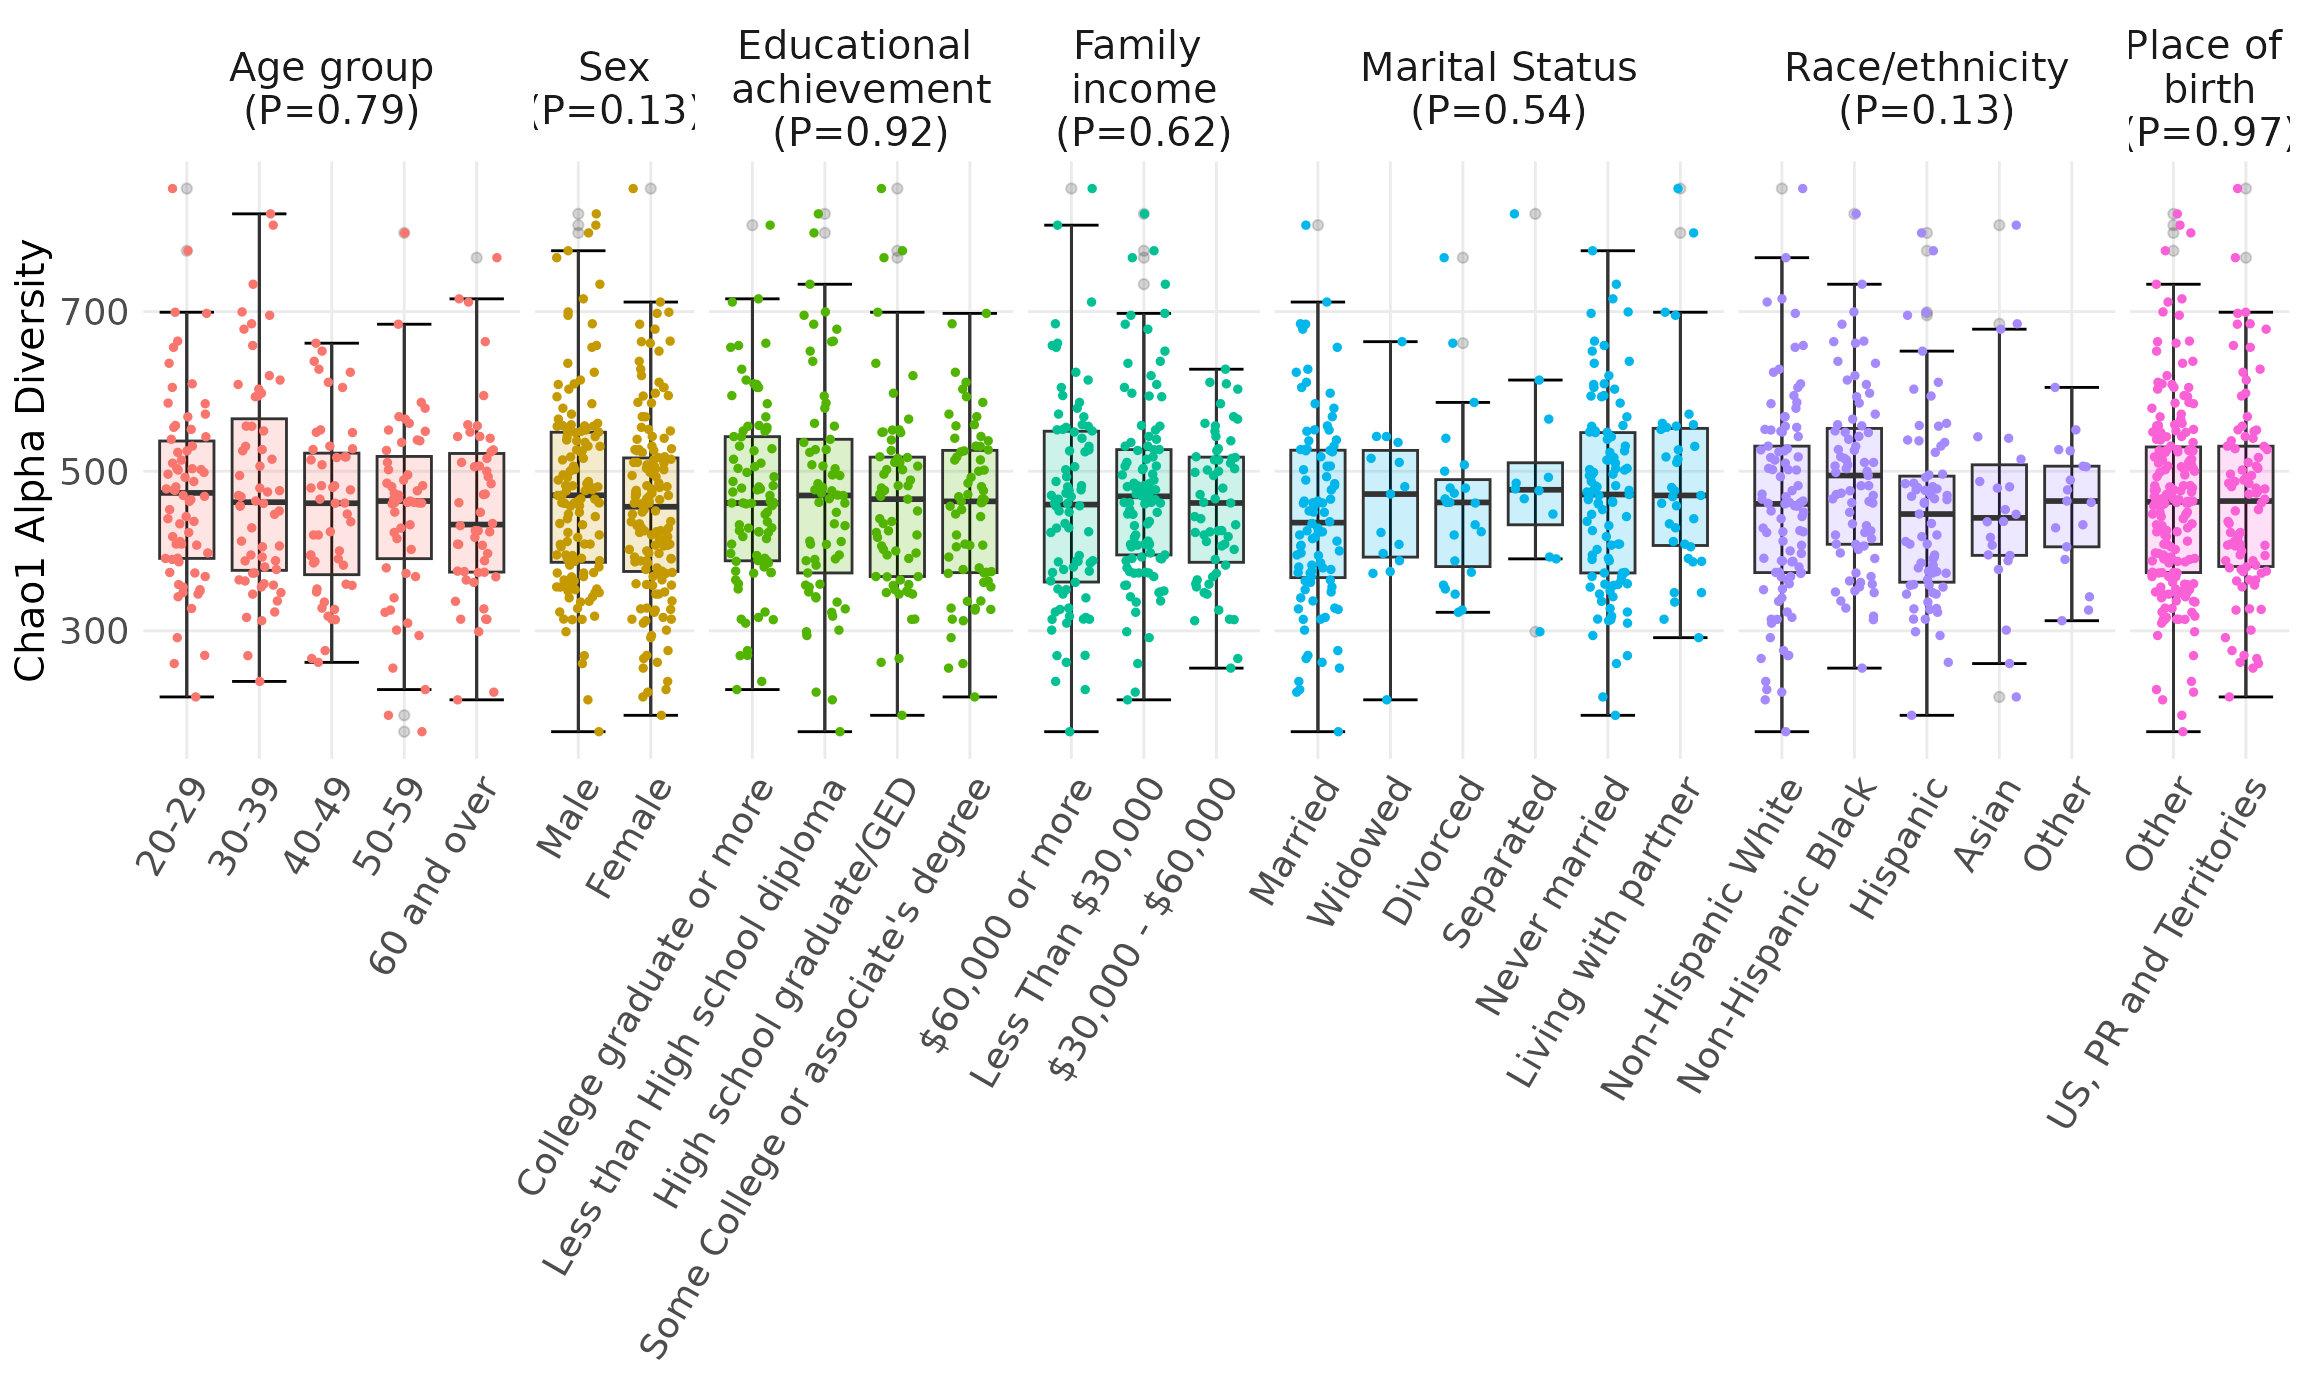 Alpha diversity by Sociodemographic Characteristics. Chao1 alpha diversity of 16S rRNA oral microbiome samples. Measures were compared using a null hypothesis of no difference between groups (Kruskal-Wallis test, p > 0.1 for all tests). Data are from the oral microbiome subsample (n=296) of the New York City Health and Nutrition Examination Survey, 2013-2014. Abbreviations: GED=General equivalency diploma; PR=Puerto Rico; US=United States.